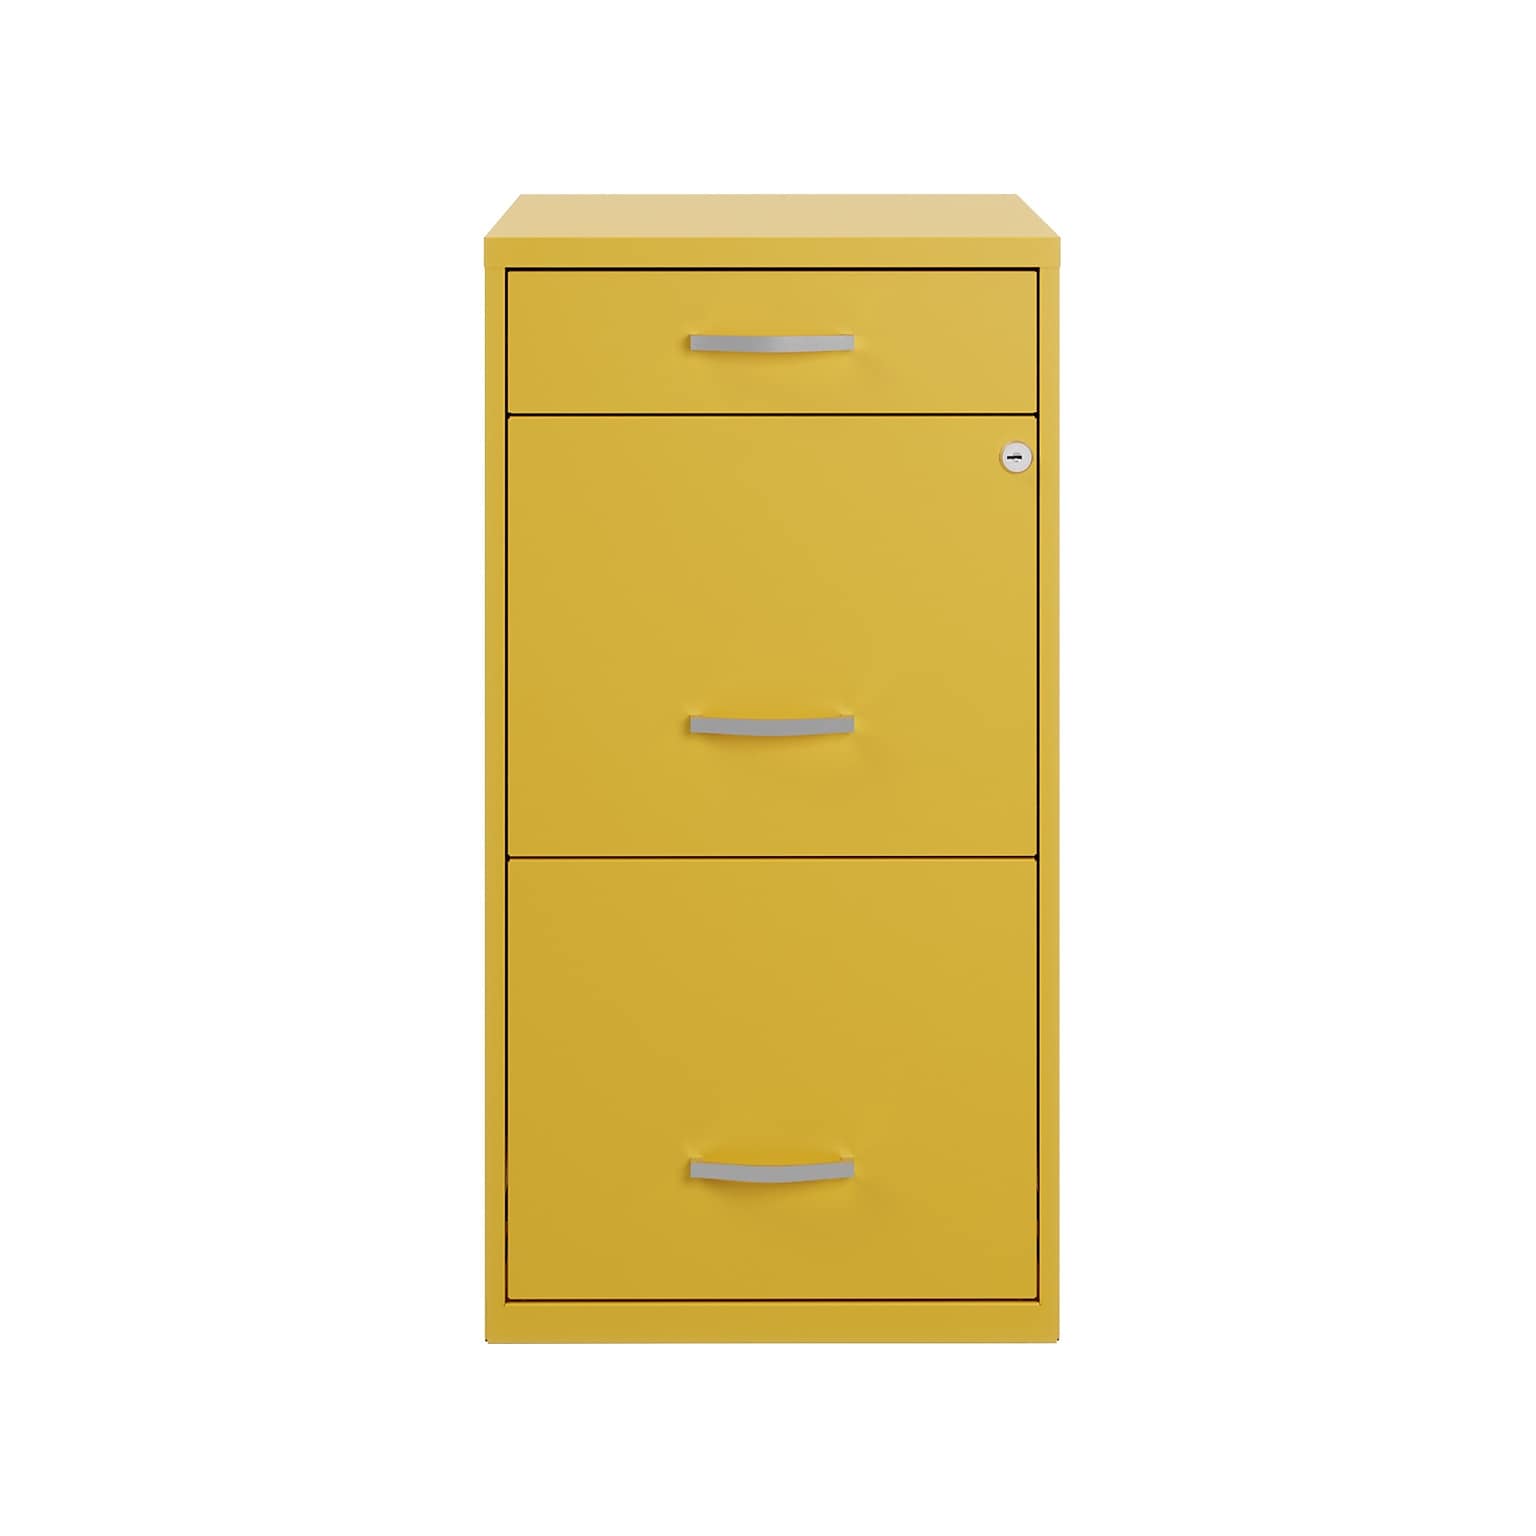 Space Solutions SOHO Organizer 3-Drawer Vertical File Cabinet, Letter Size, Lockable, Goldfinch (25280)